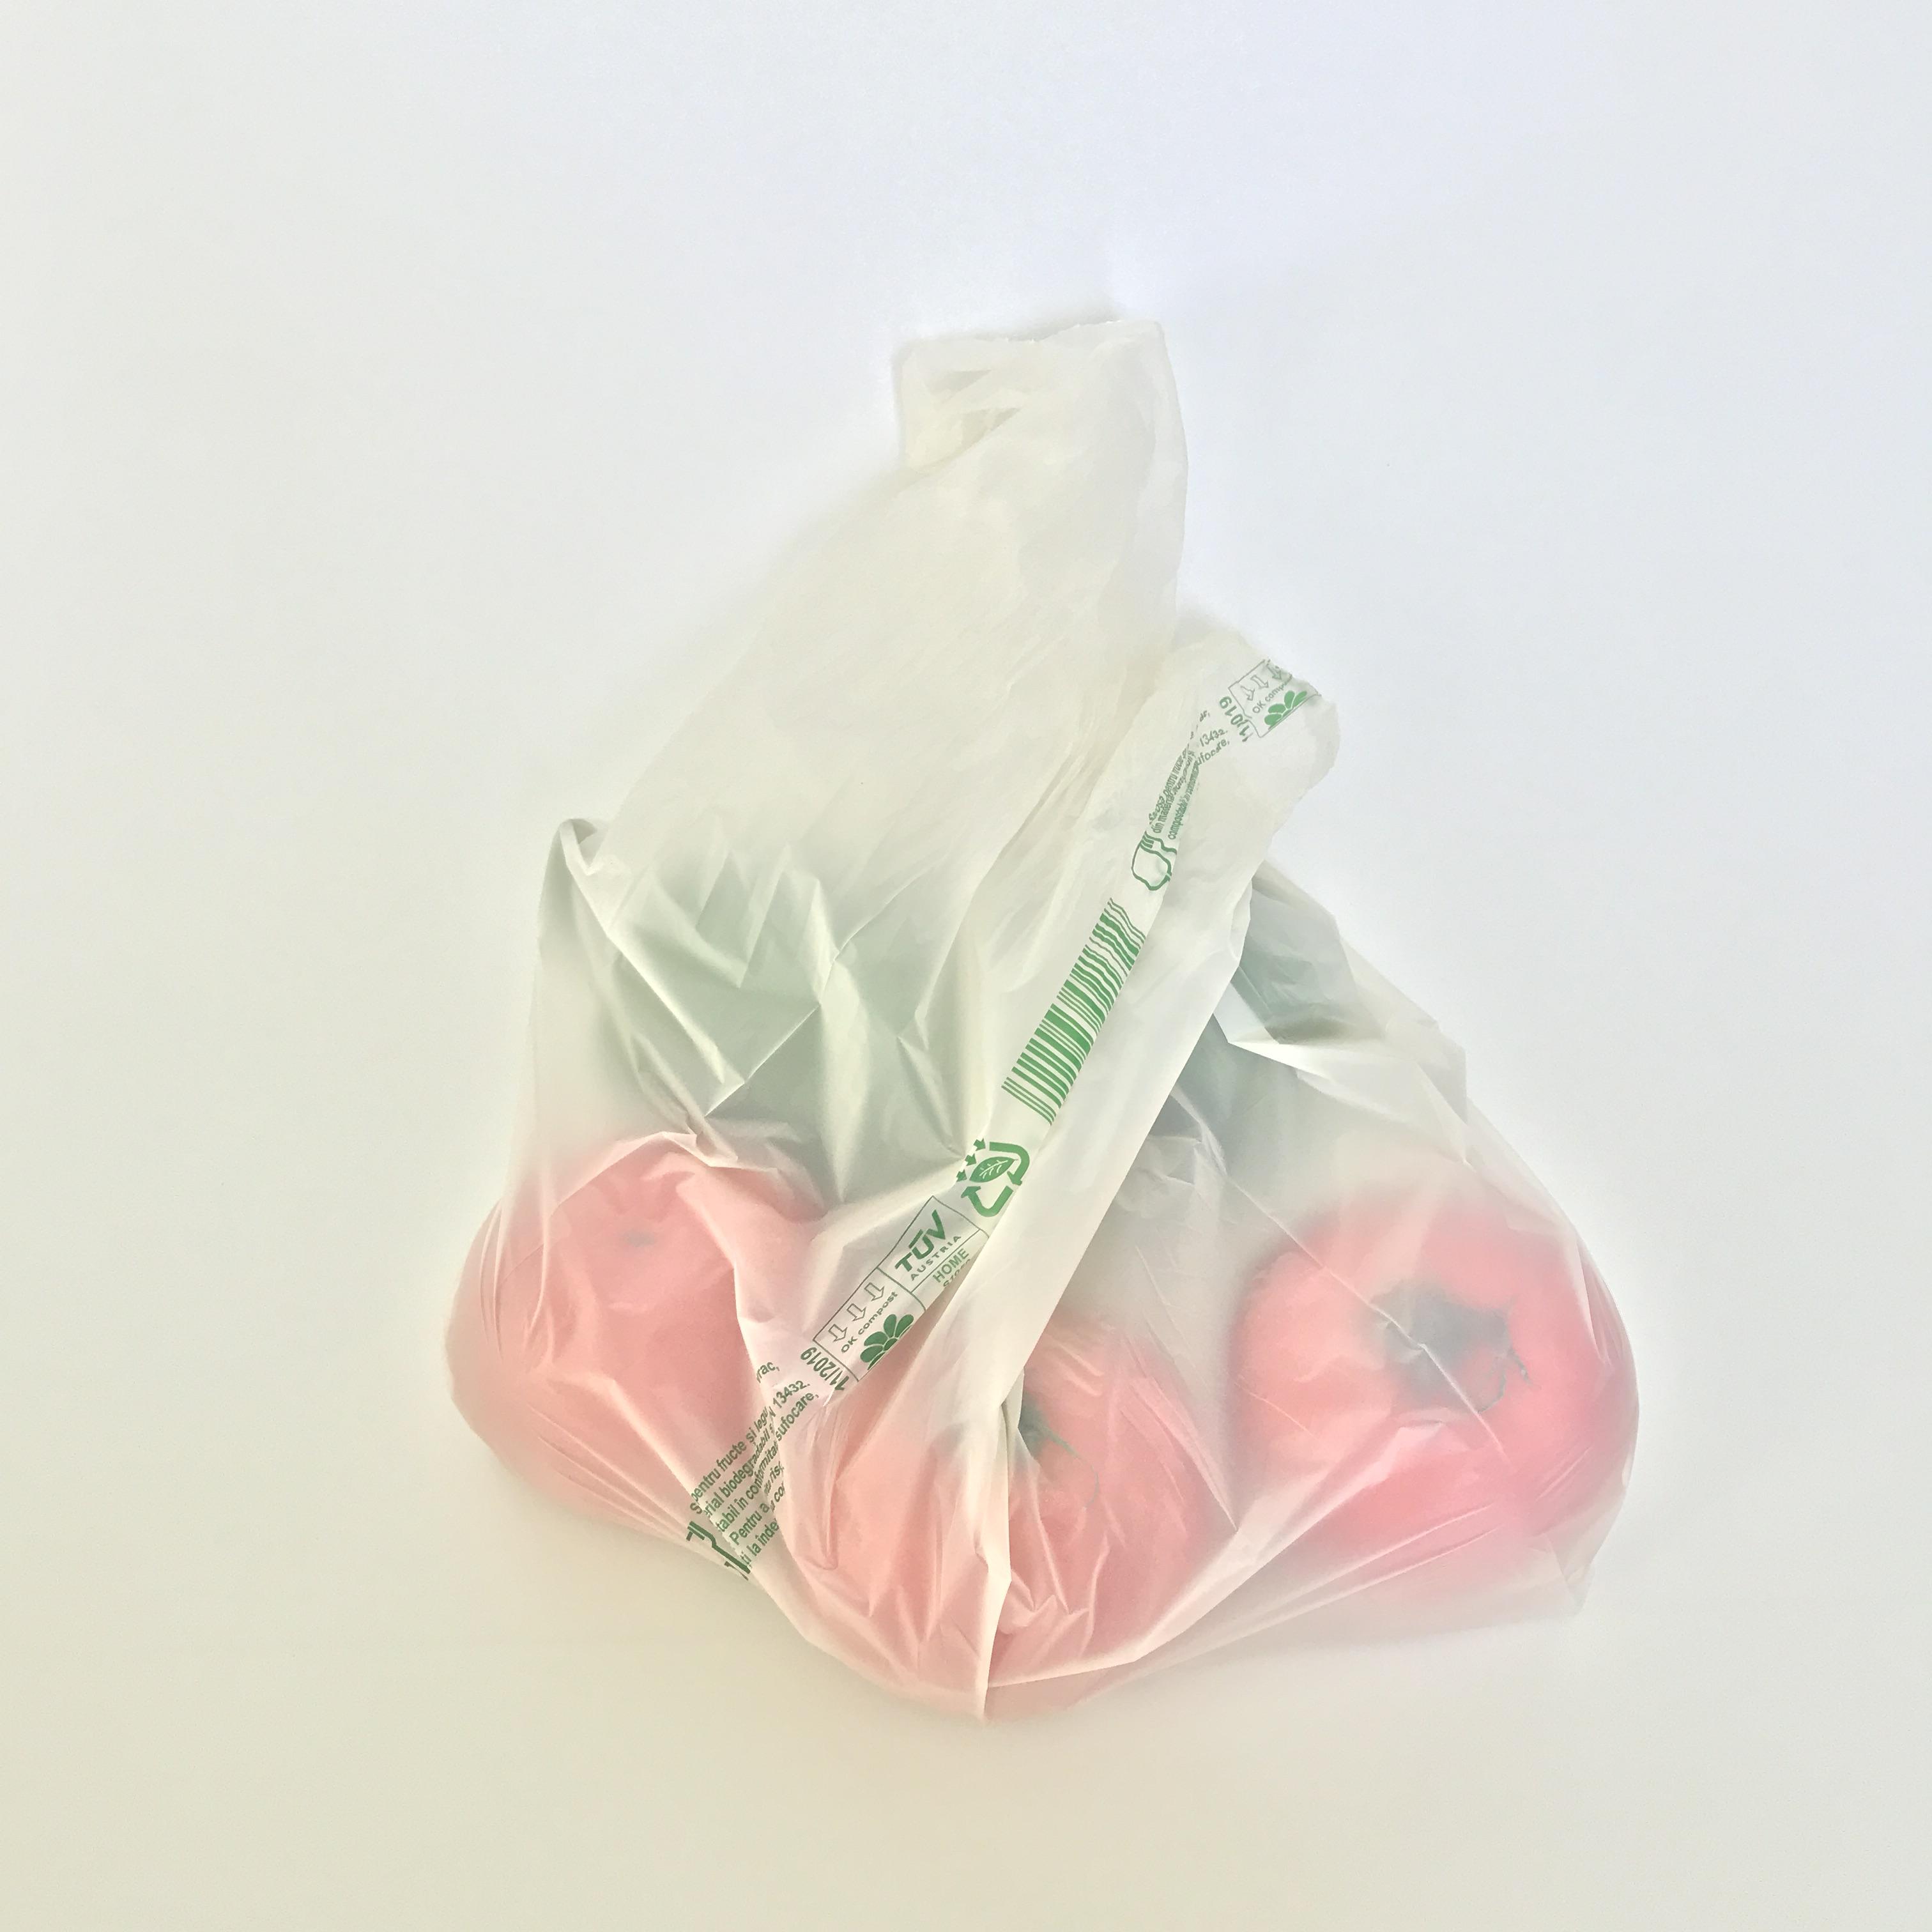 100% biodegradable and composable food packaging bags点击查看详细信息